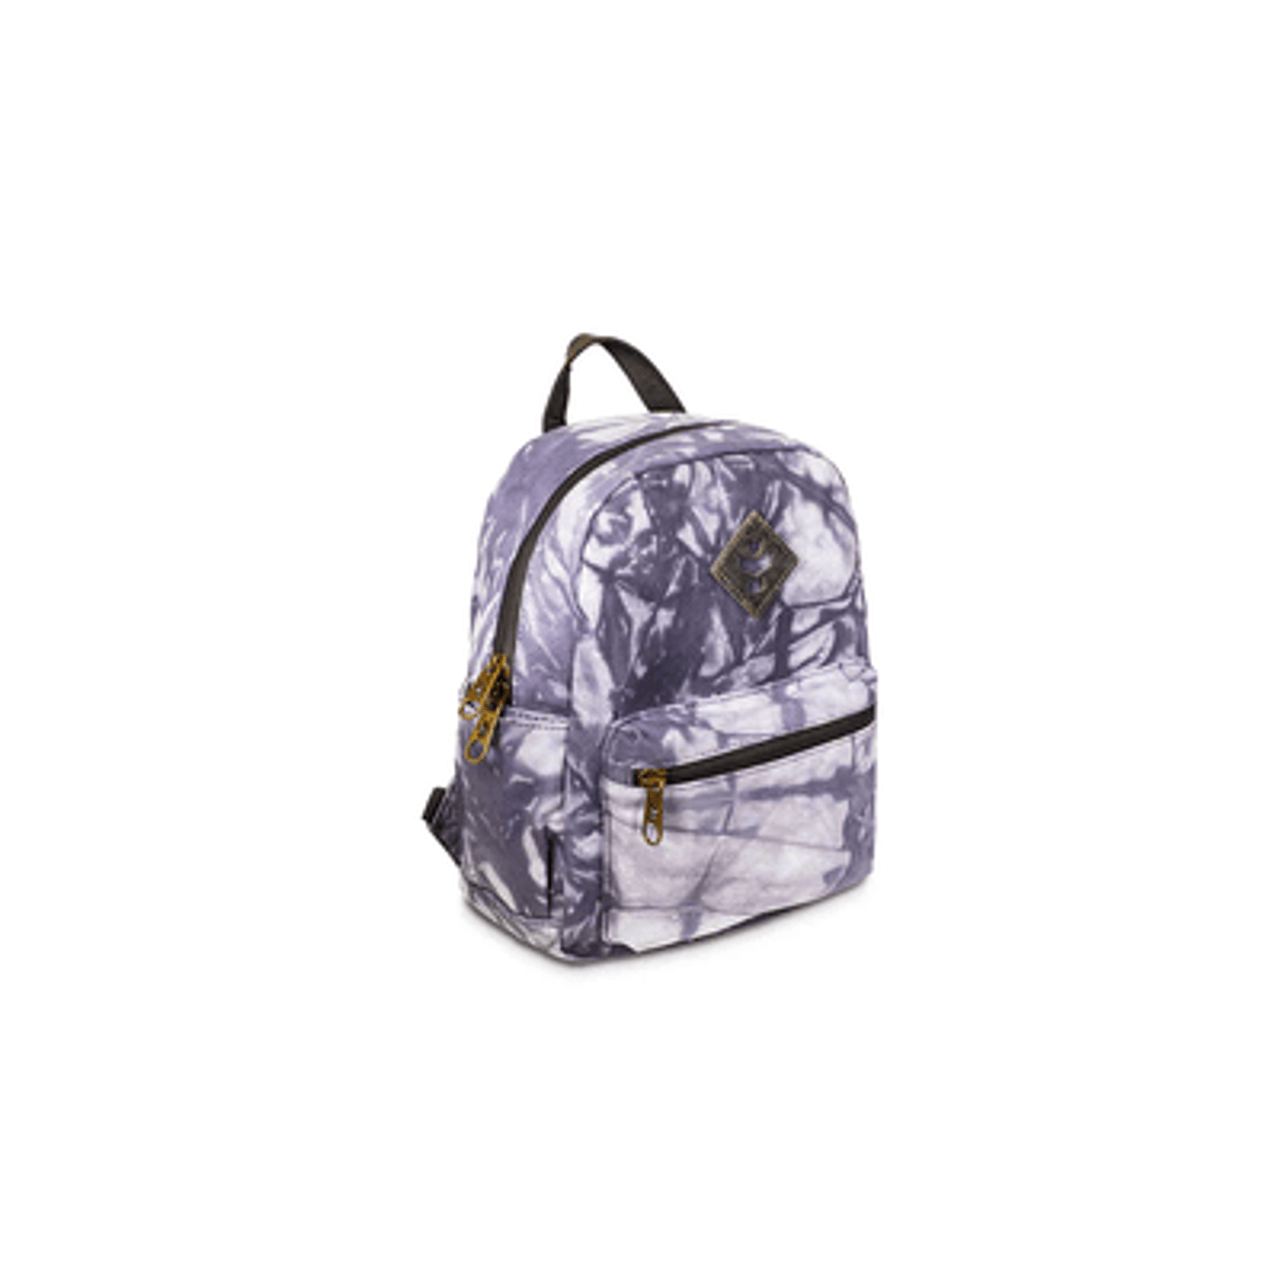 The Shorty - Smell Proof Mini Backpack - Tie Dye